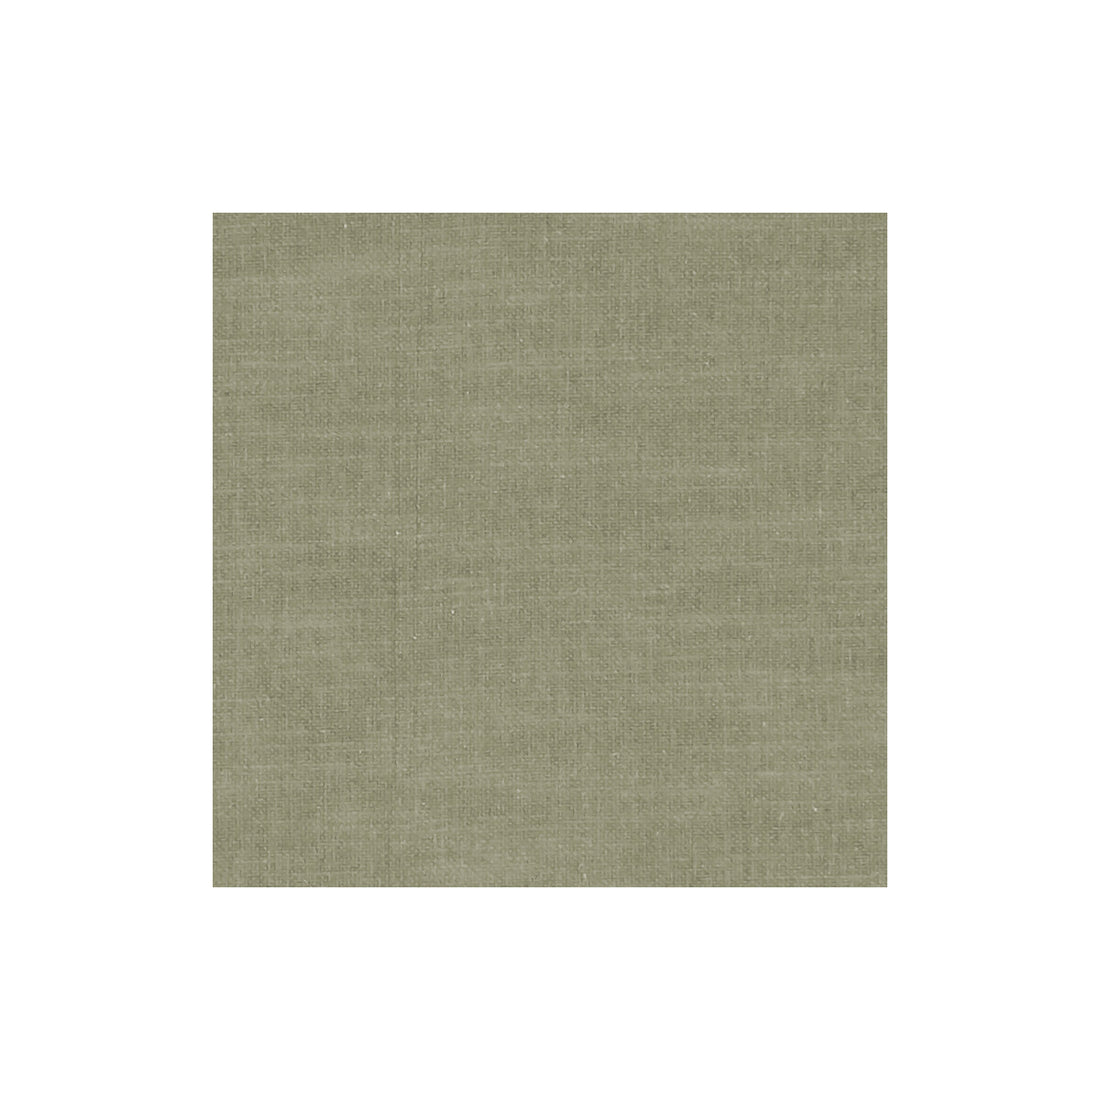 Amalfi fabric in khaki color - pattern F1239/33.CAC.0 - by Clarke And Clarke in the Clarke &amp; Clarke Amalfi collection